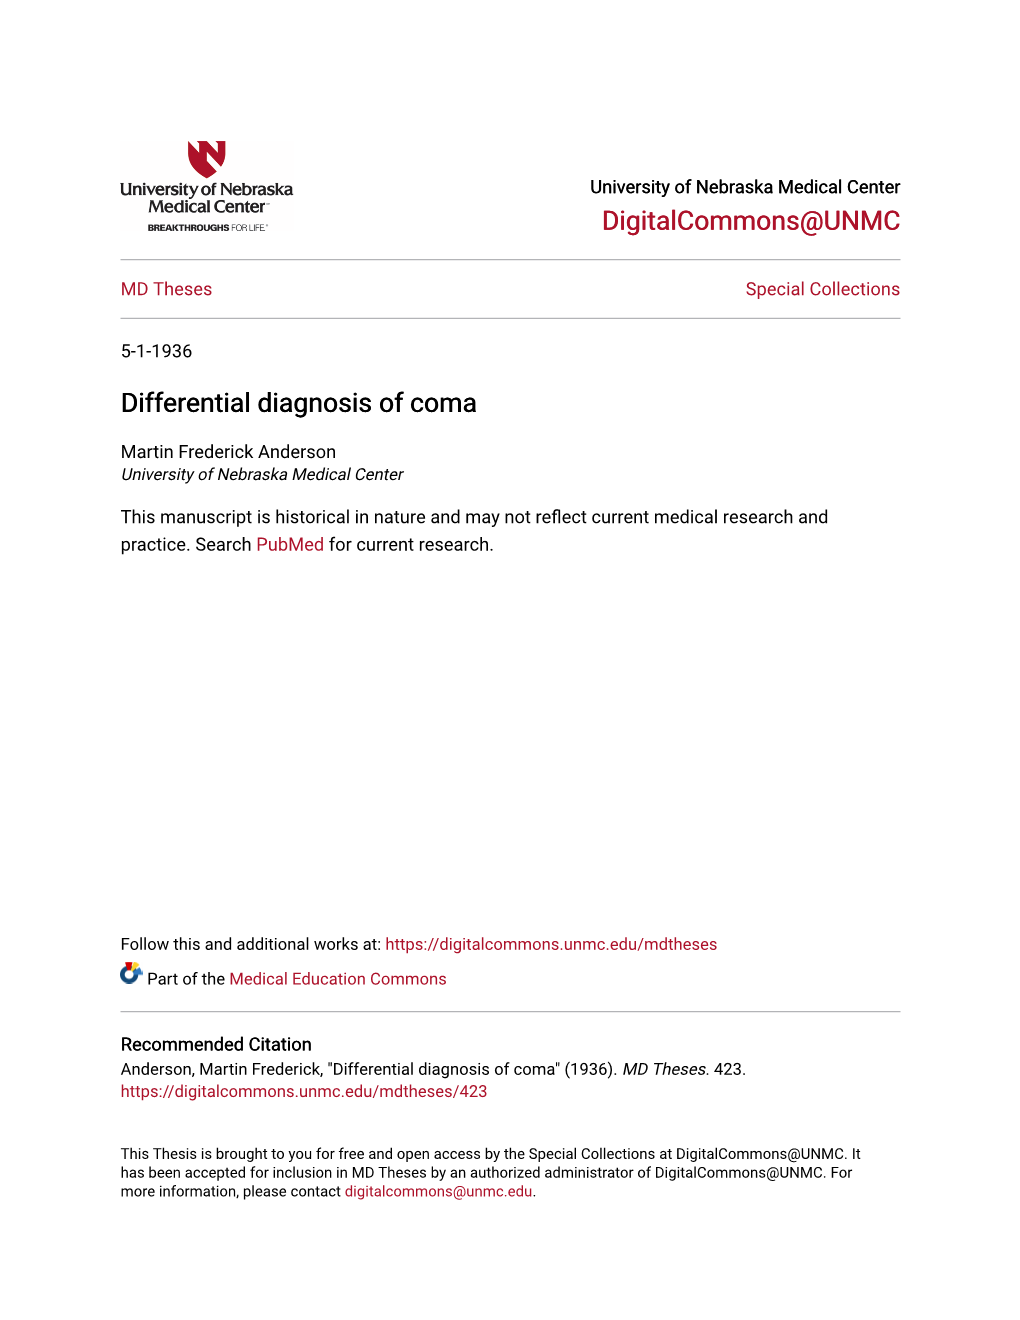 Differential Diagnosis of Coma